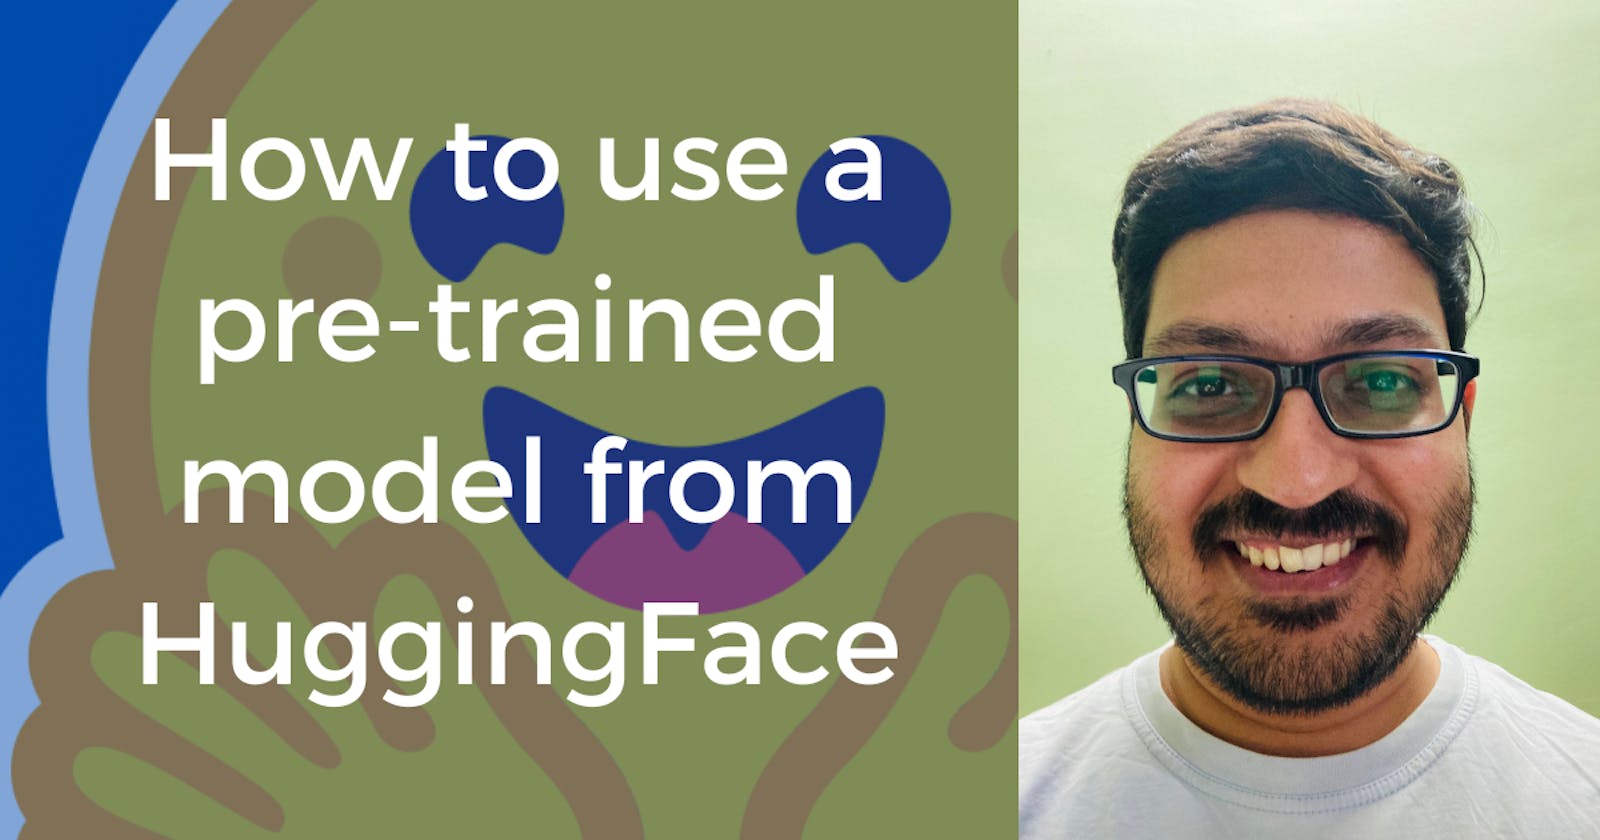 How to use a pre-trained model from HuggingFace